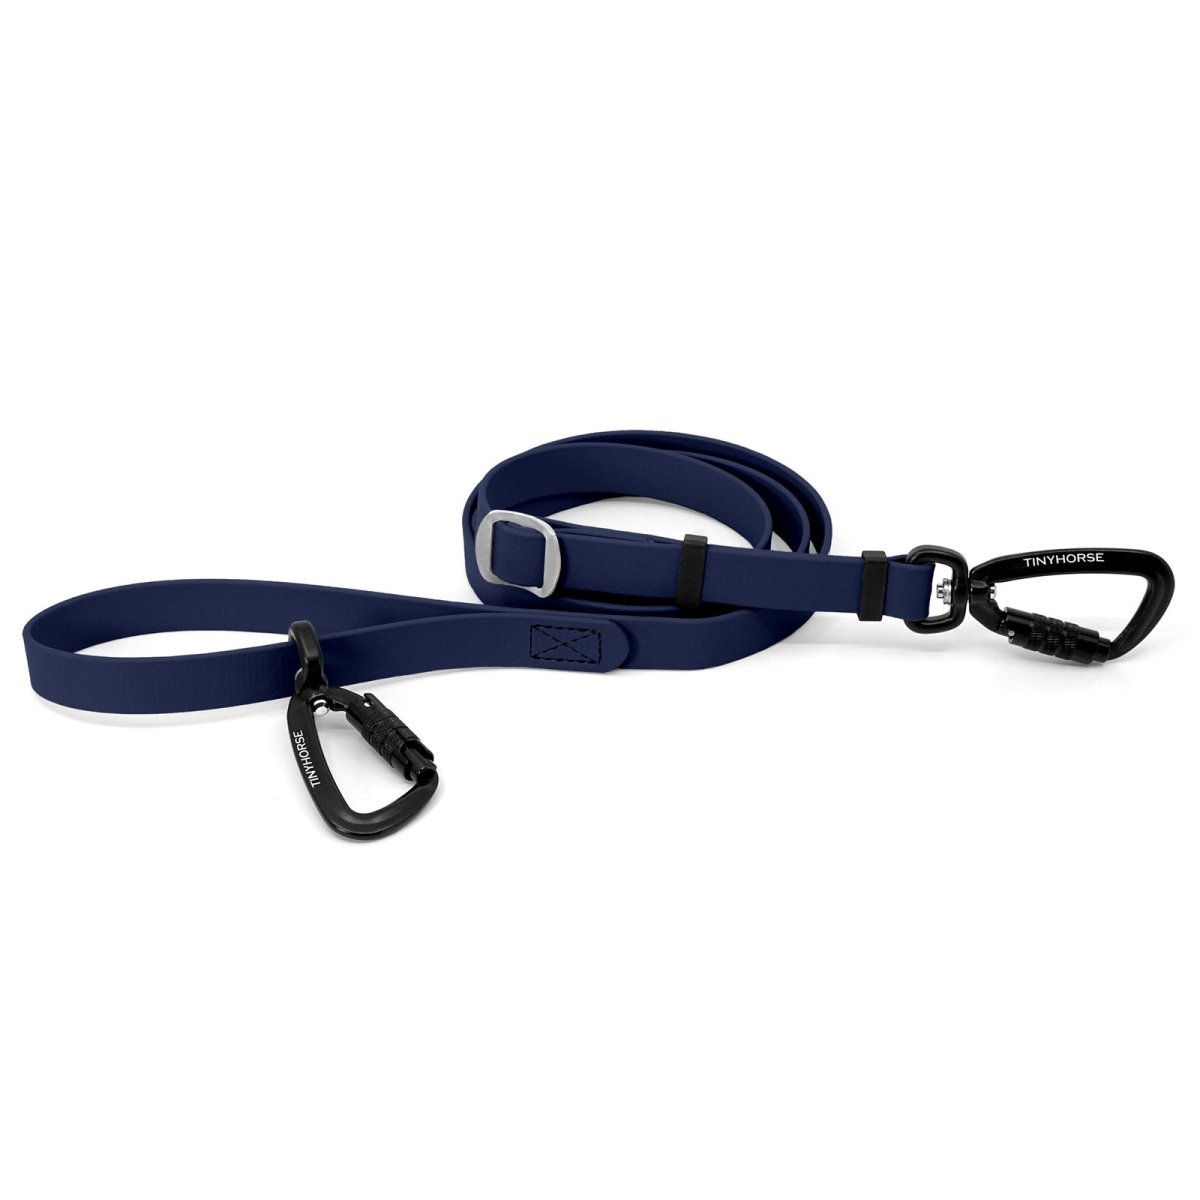 An adjustable navy-coloured Lead-All Pro Extra made of BioThane with 2 auto-locking carabiners